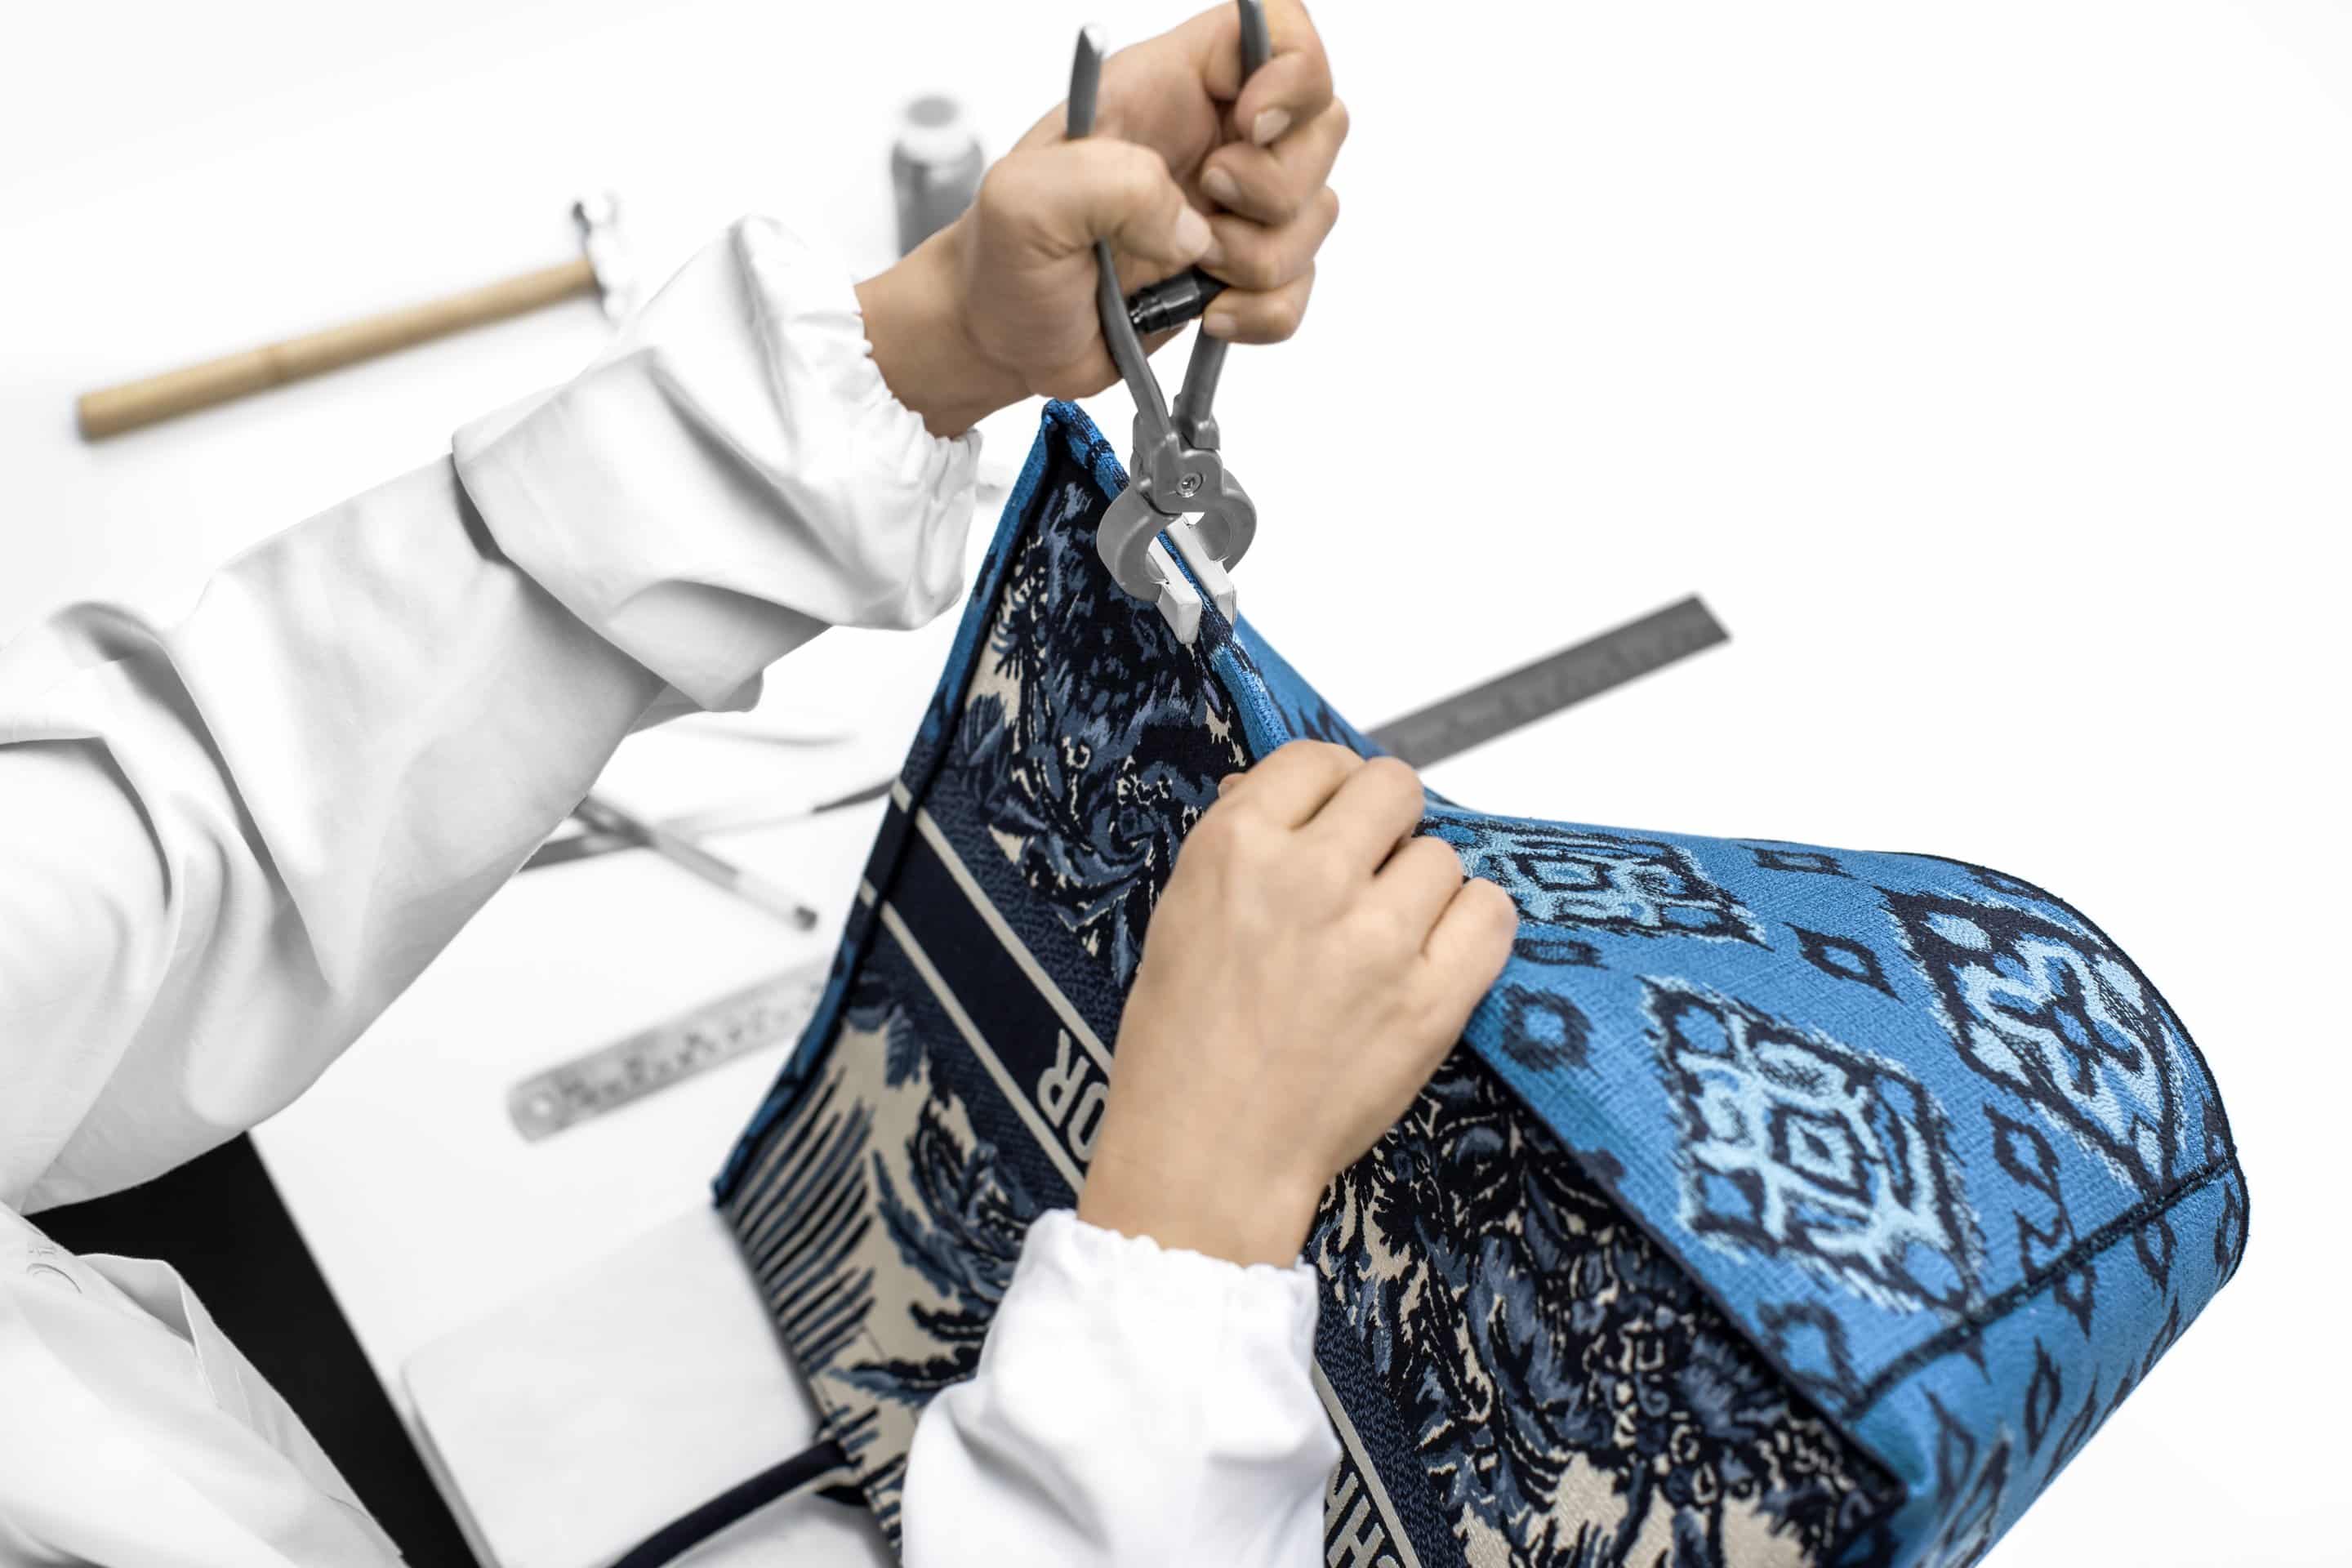 Step inside the Dior ateliers: The making of the Dior Saddle Bag